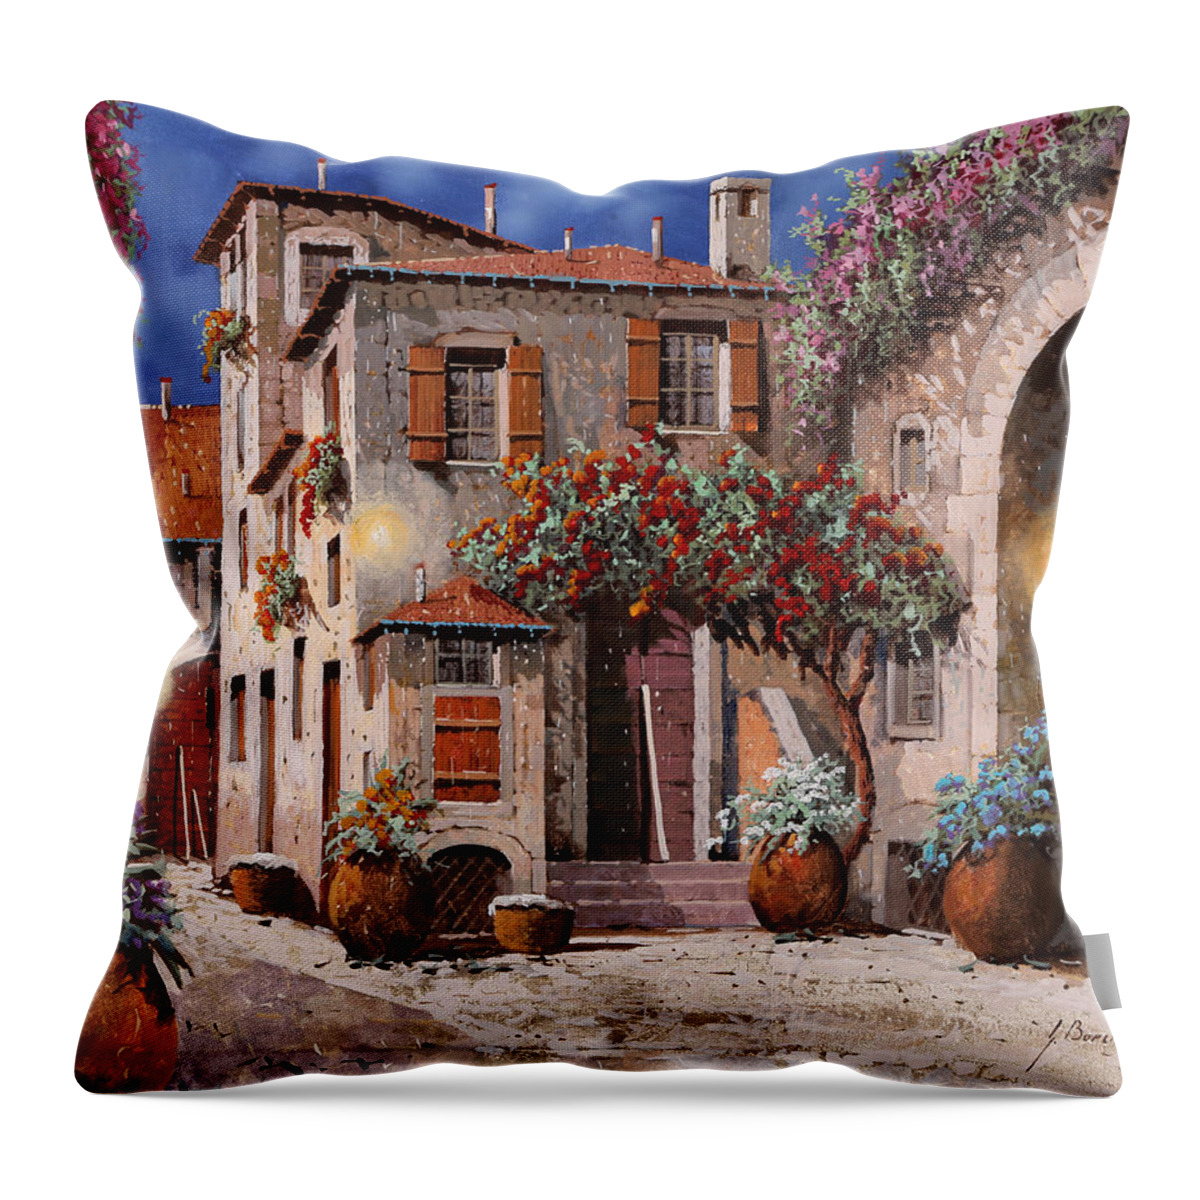 Arch Throw Pillow featuring the painting Tre Luci Al Crepuscolo by Guido Borelli